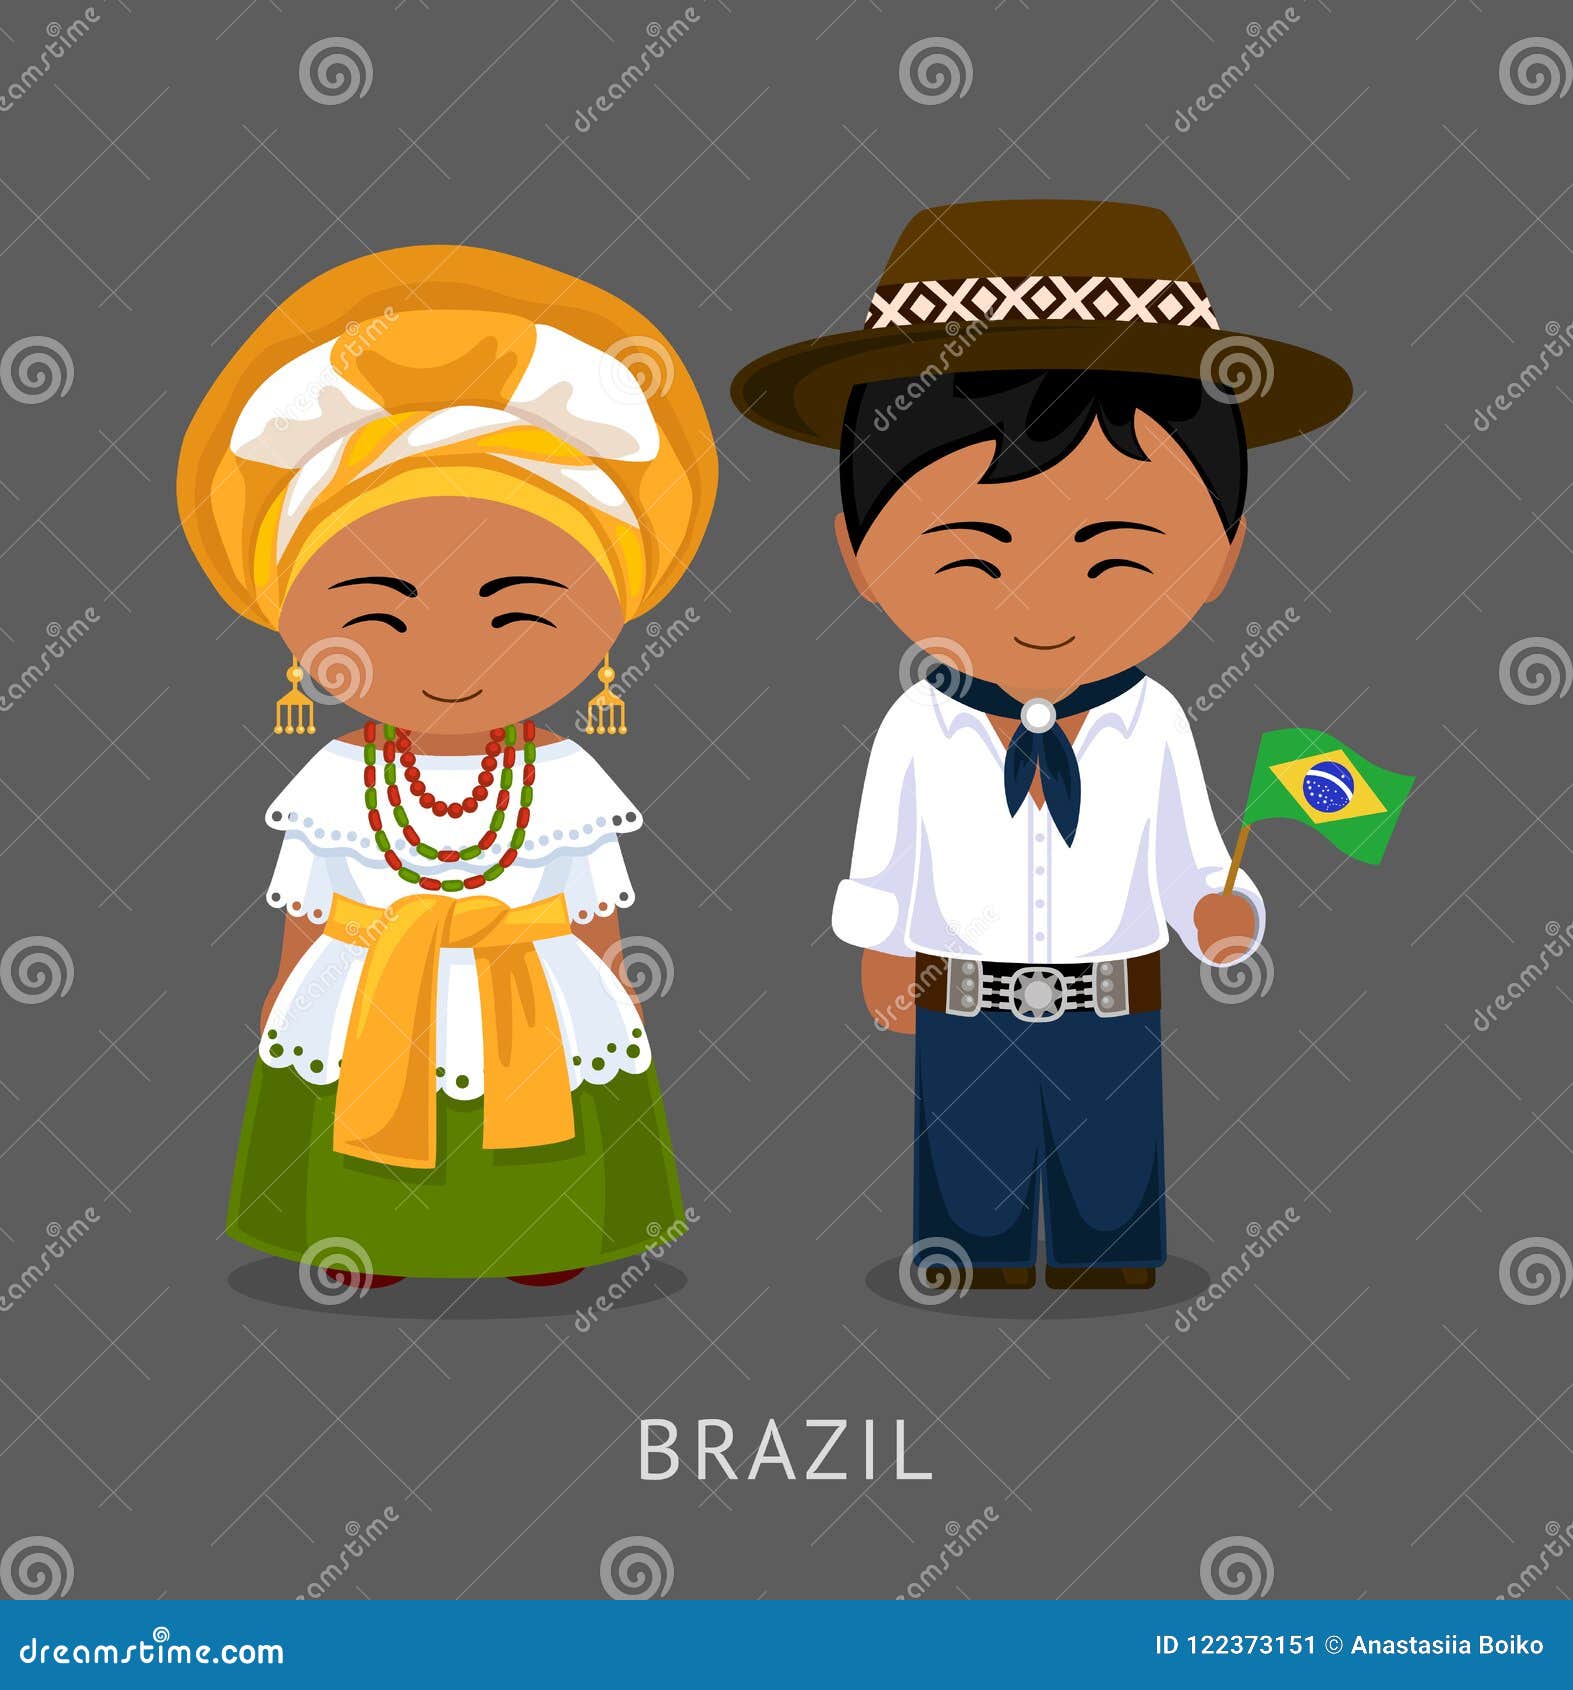 Brazilians in National Dress with a ...